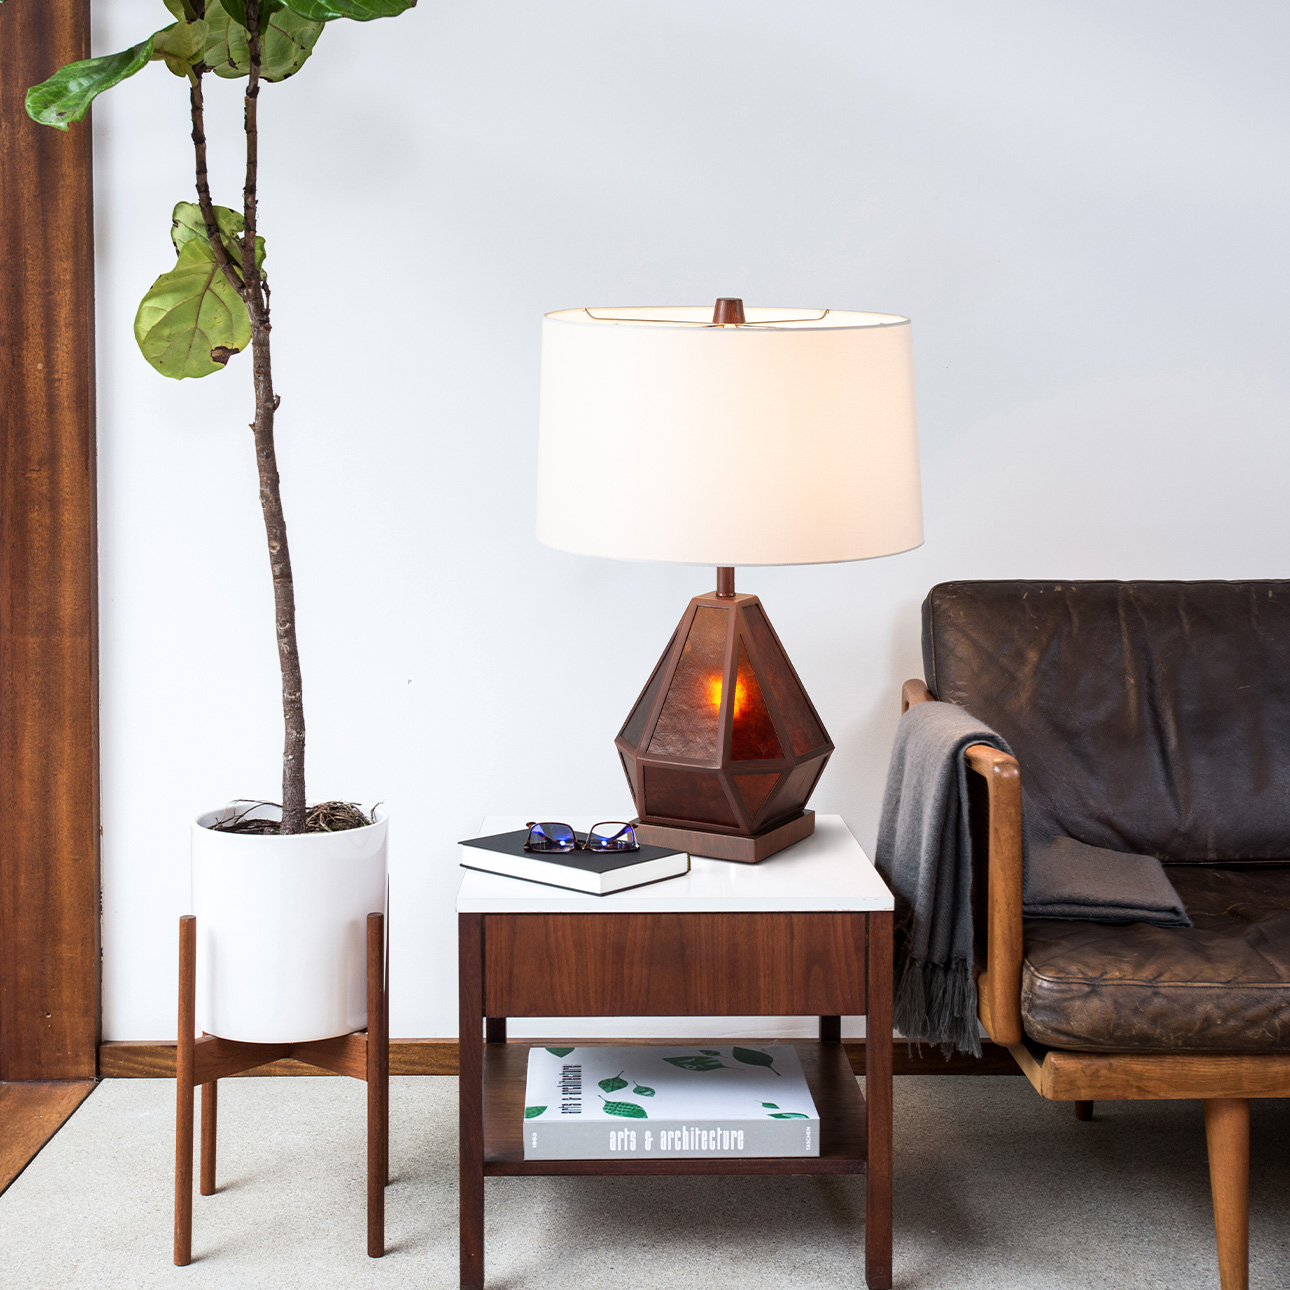 Artifact 22″ Natural Mica Table Lamp in Dark Walnut and Espresso Bronze with nightlight feature and 4-Way Rotary Switch